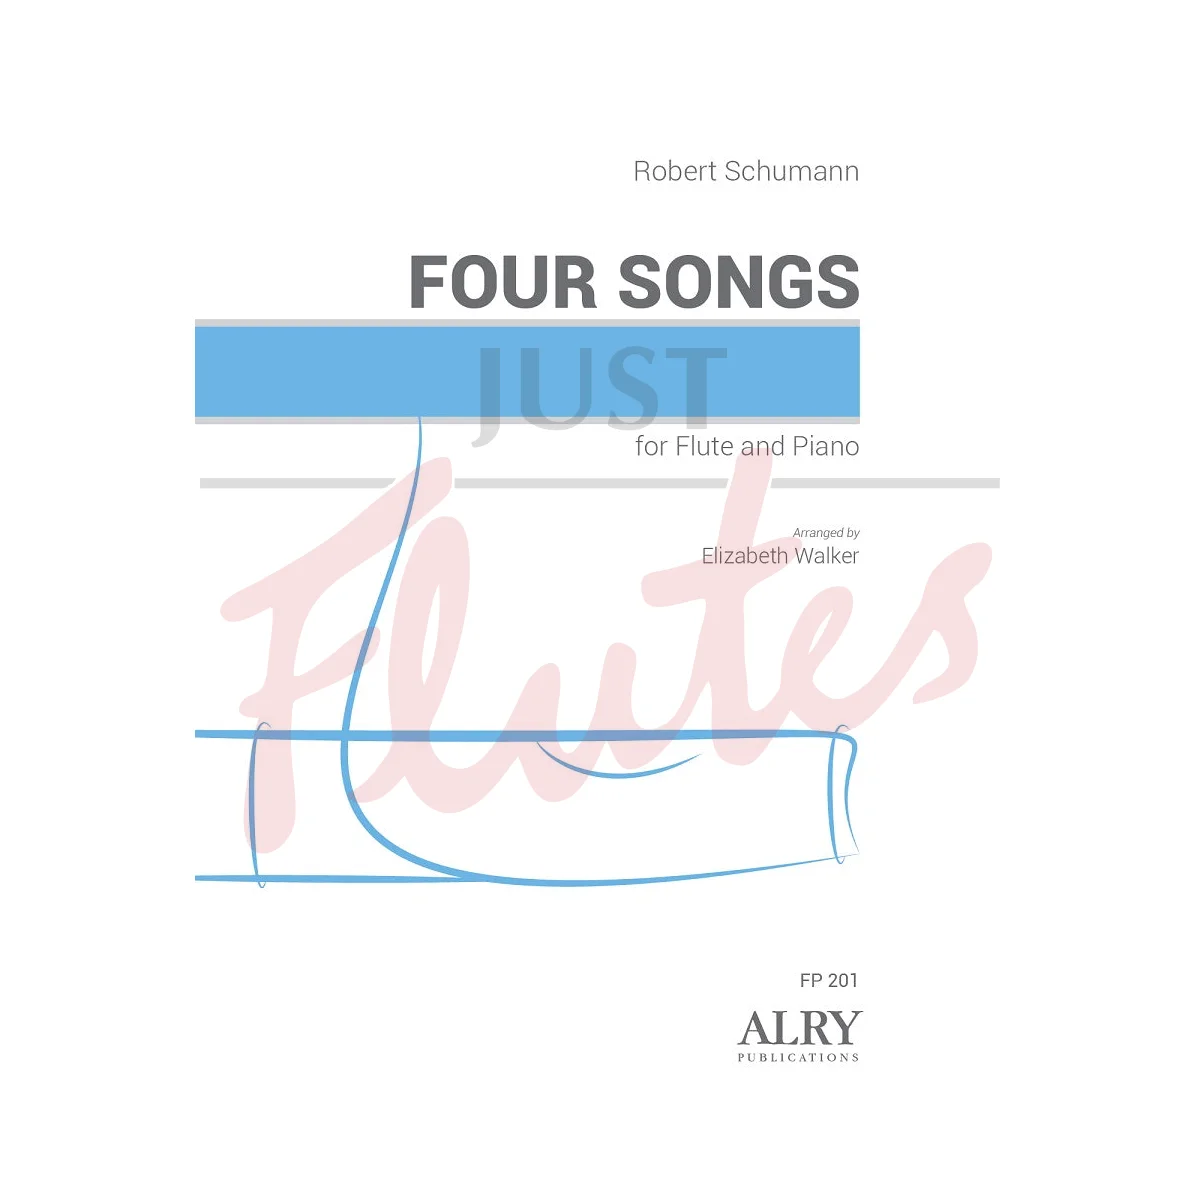 Four Songs for Flute and Piano